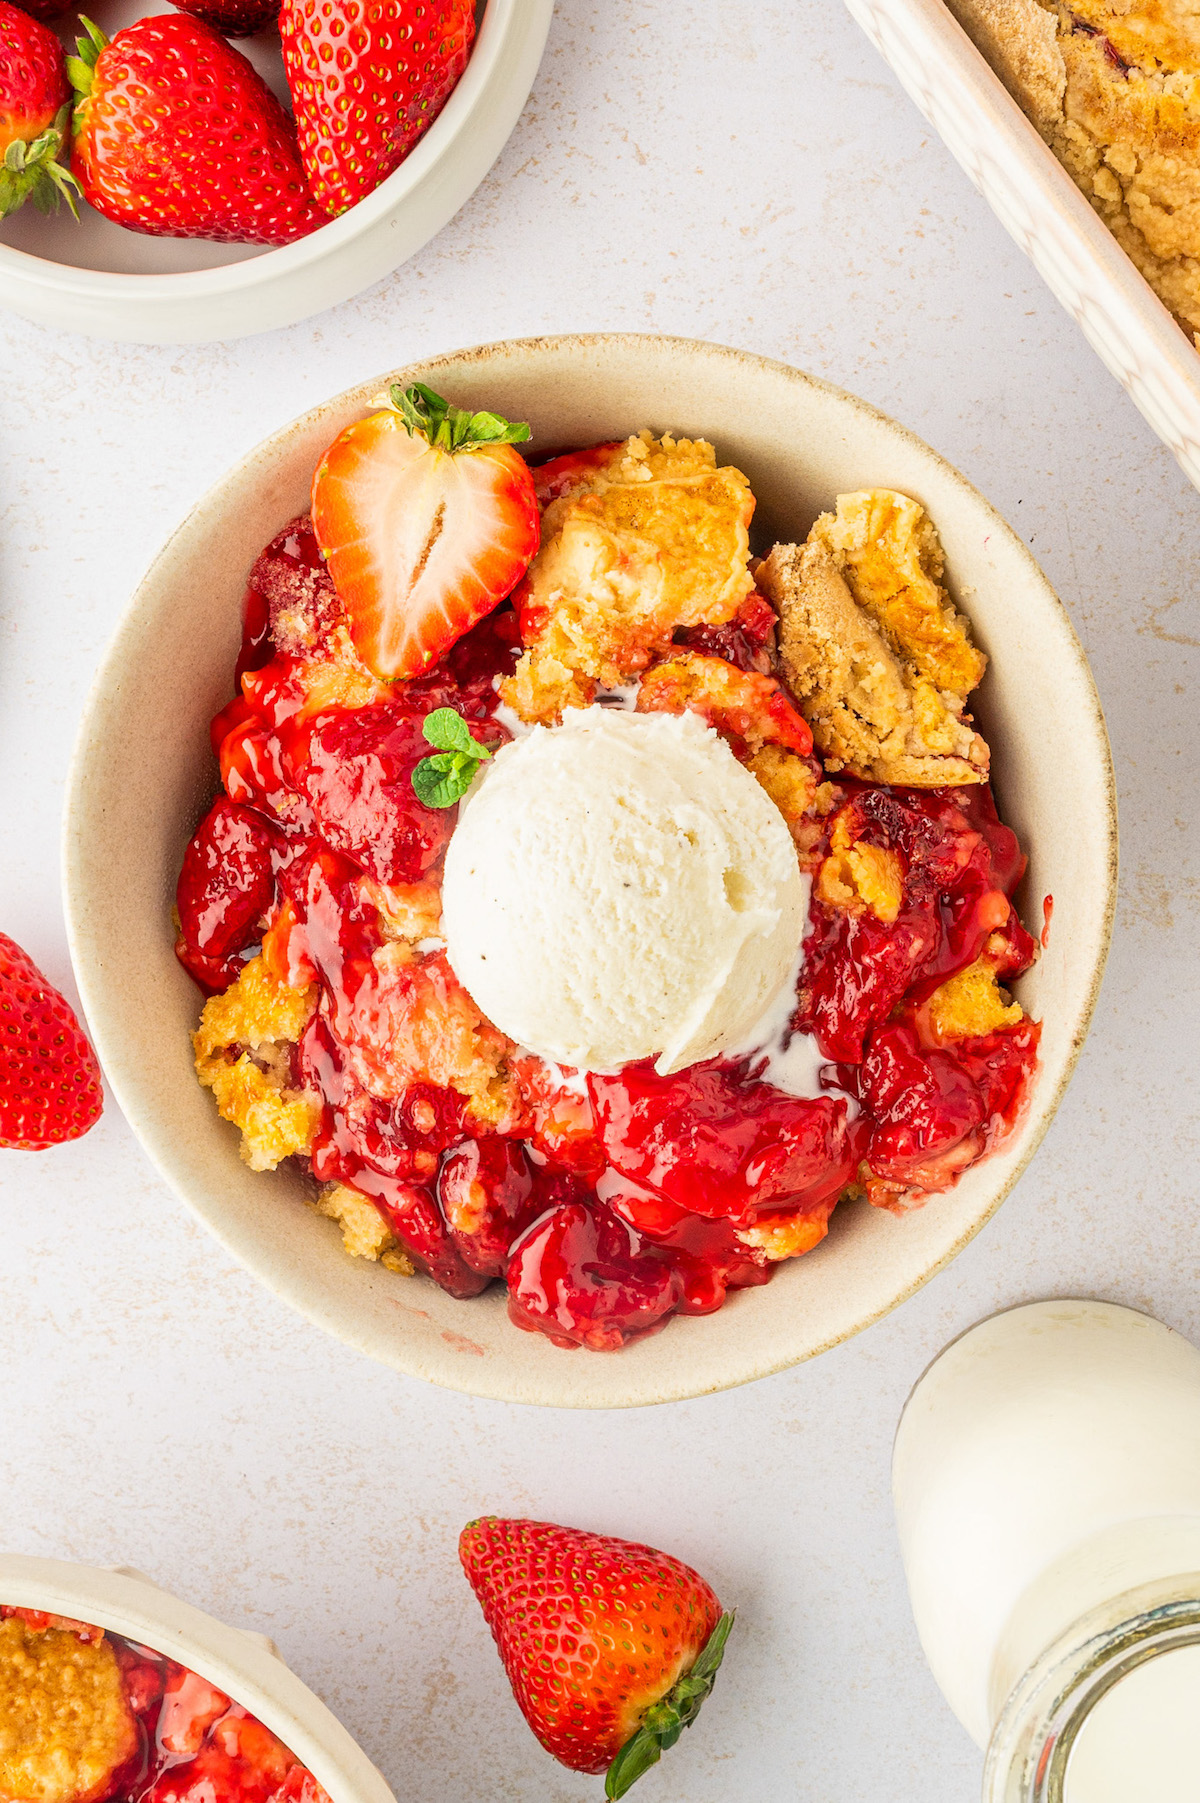 A bowl of warm strawberry dump cake with a crisp and butter topping served with a scoop of ice cream.